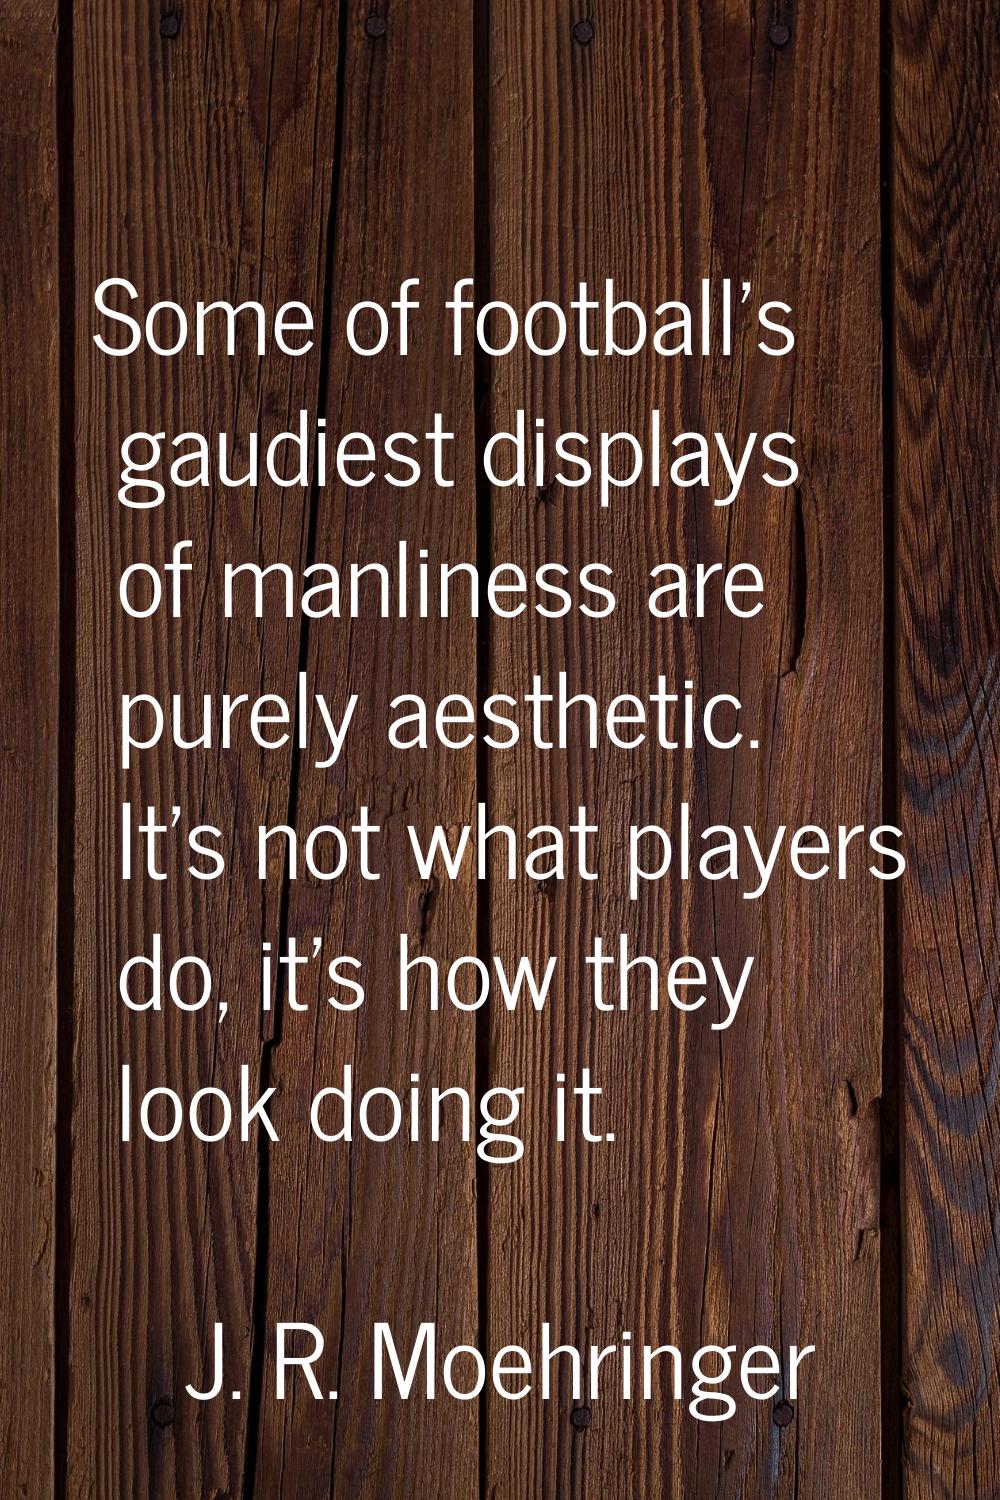 Some of football's gaudiest displays of manliness are purely aesthetic. It's not what players do, i